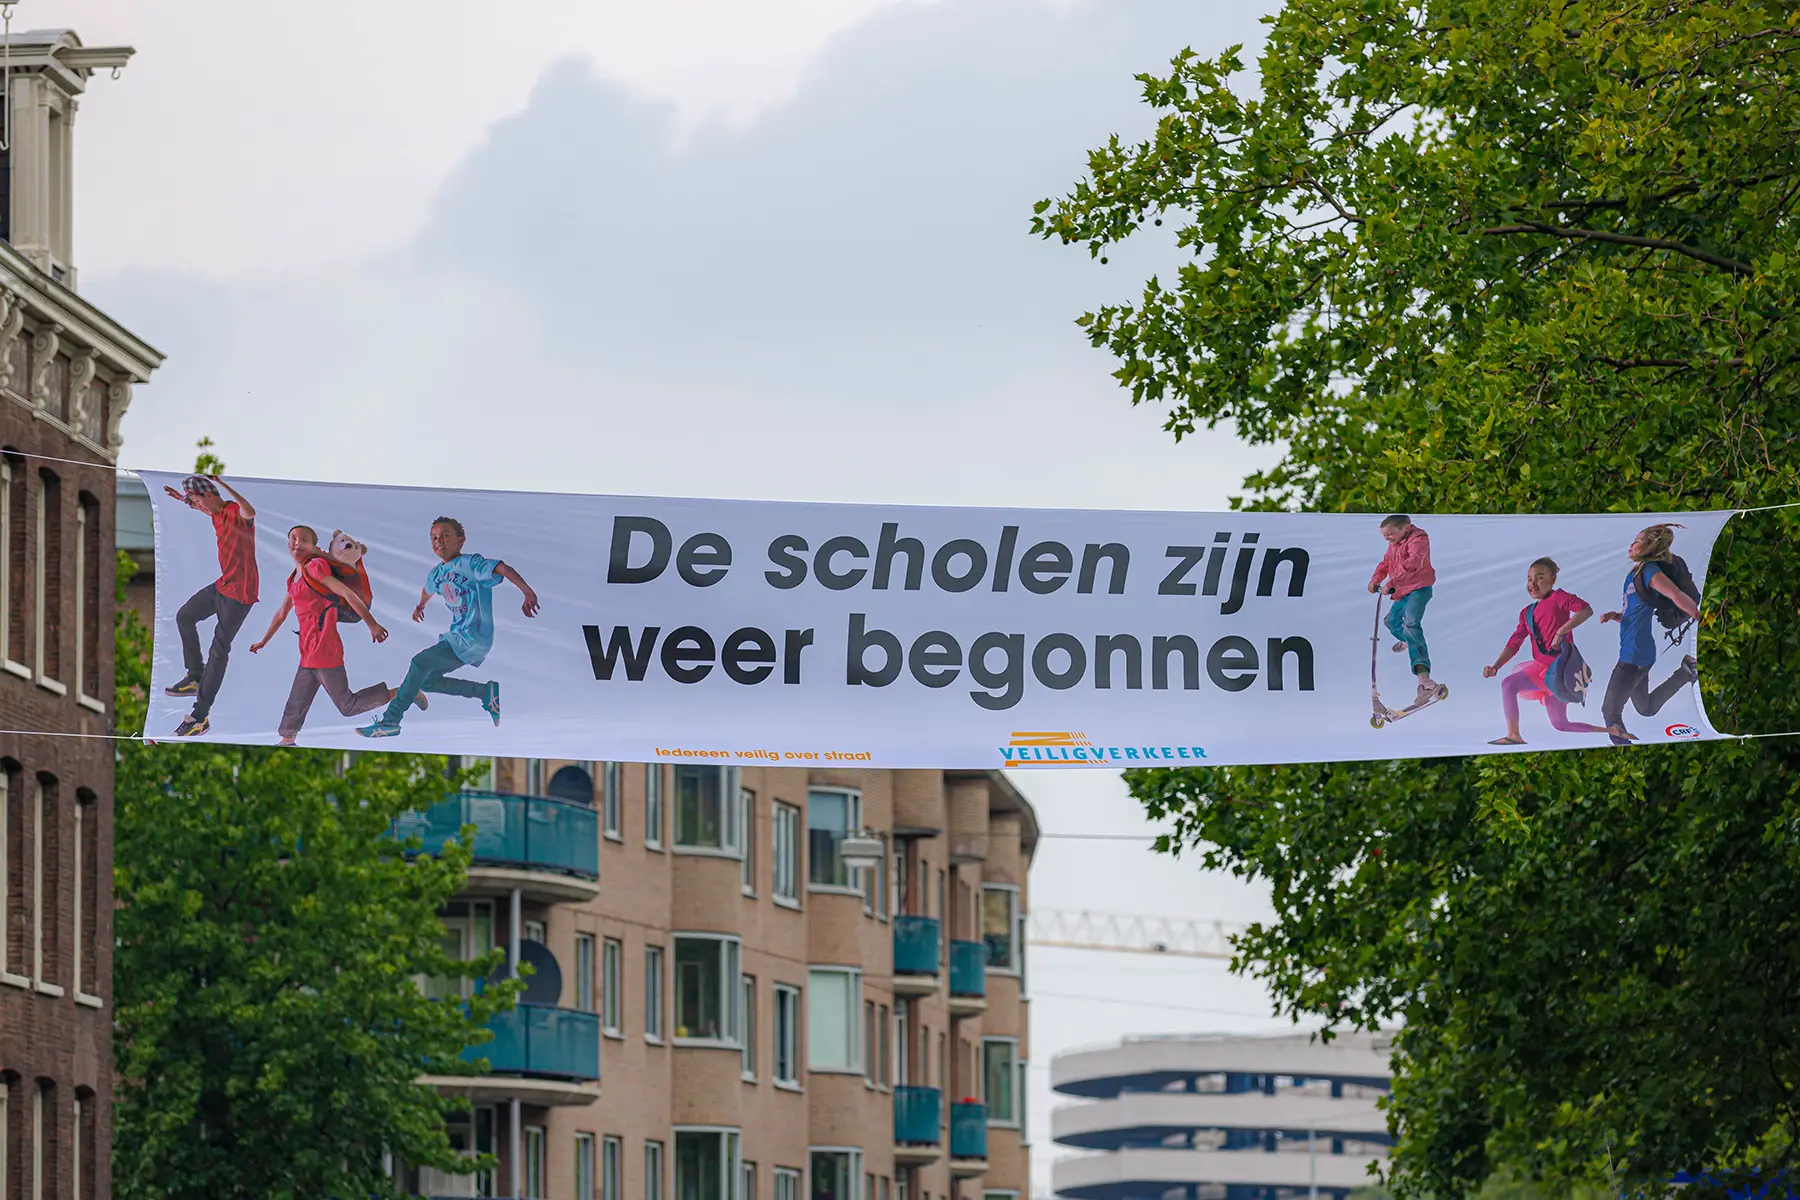 A banner marking the start of the school year in Amsterdam